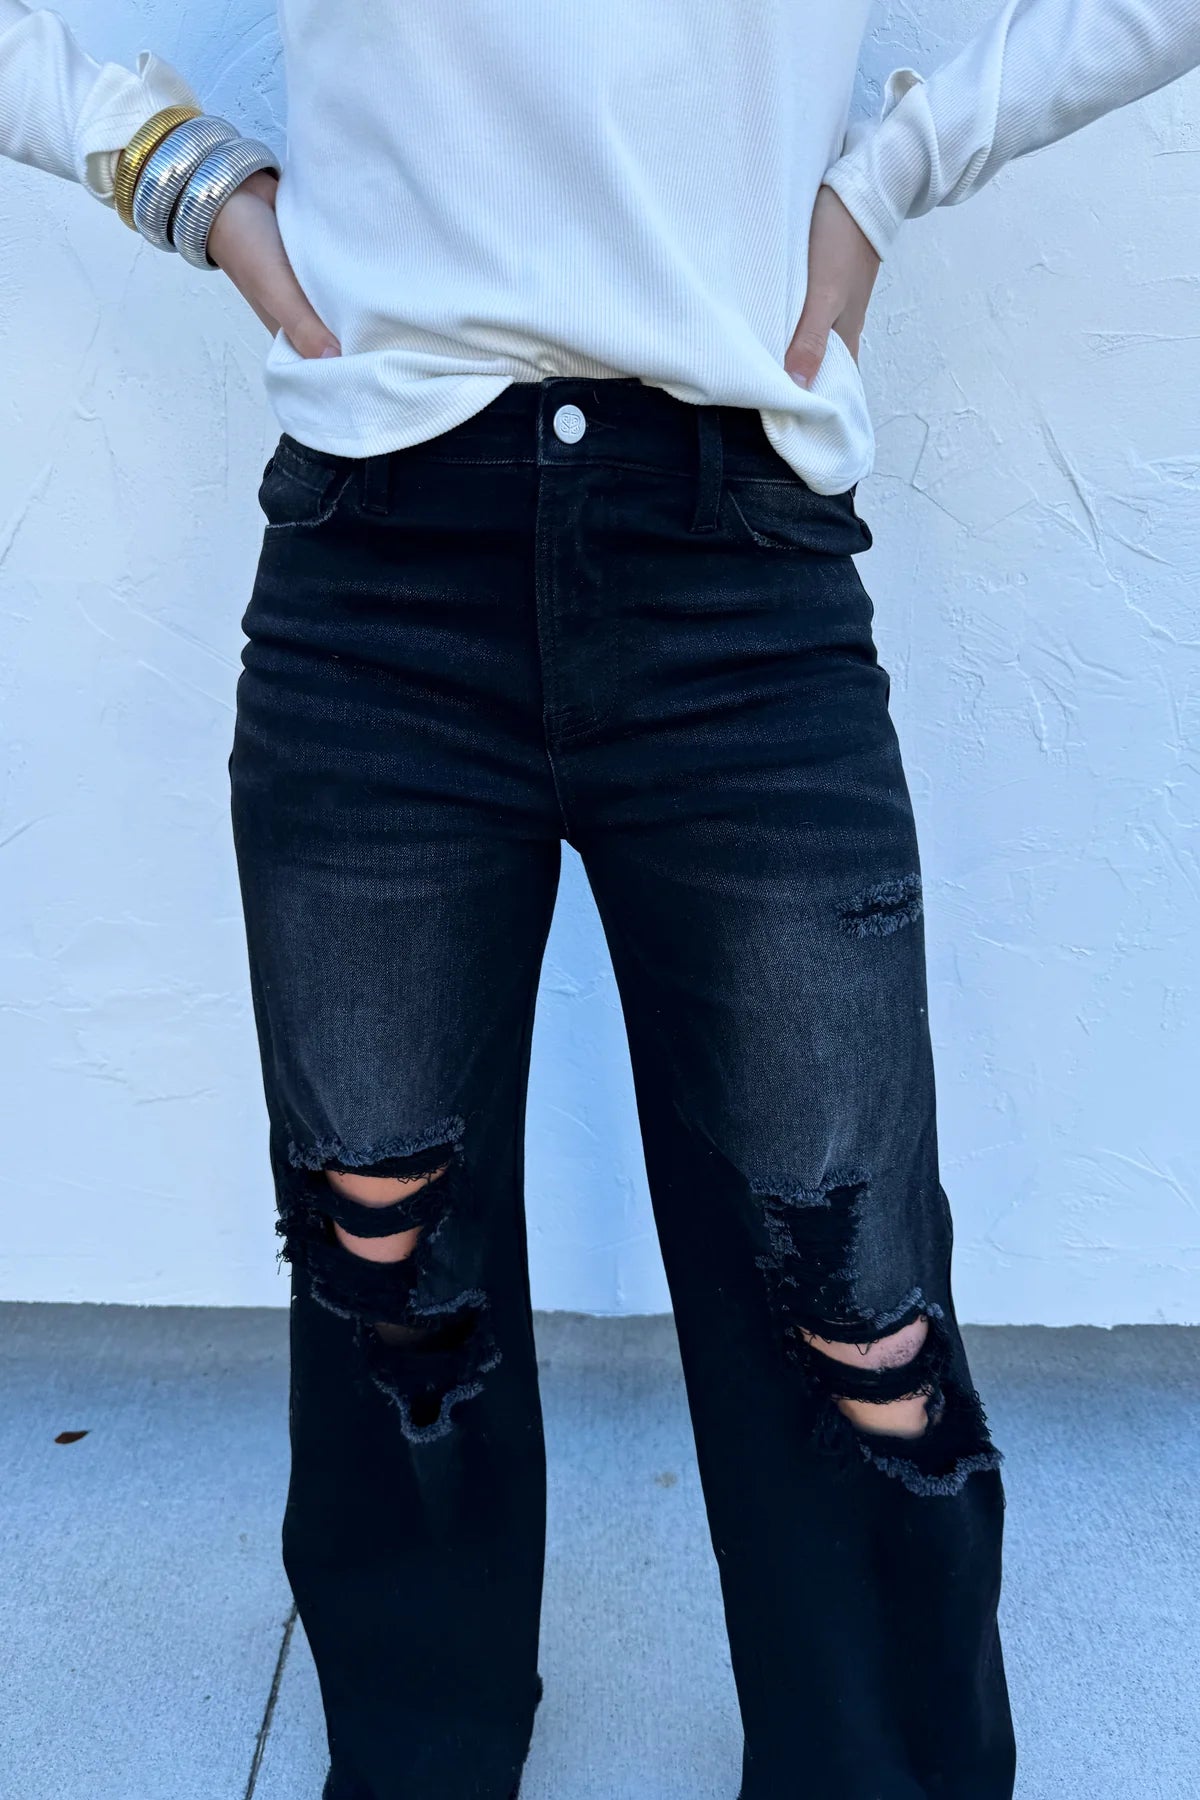 BLACK BLAKELEY DISTRESSED COLORED JEANS (arriving end of February) - CountryFide Custom Accessories and Outdoors